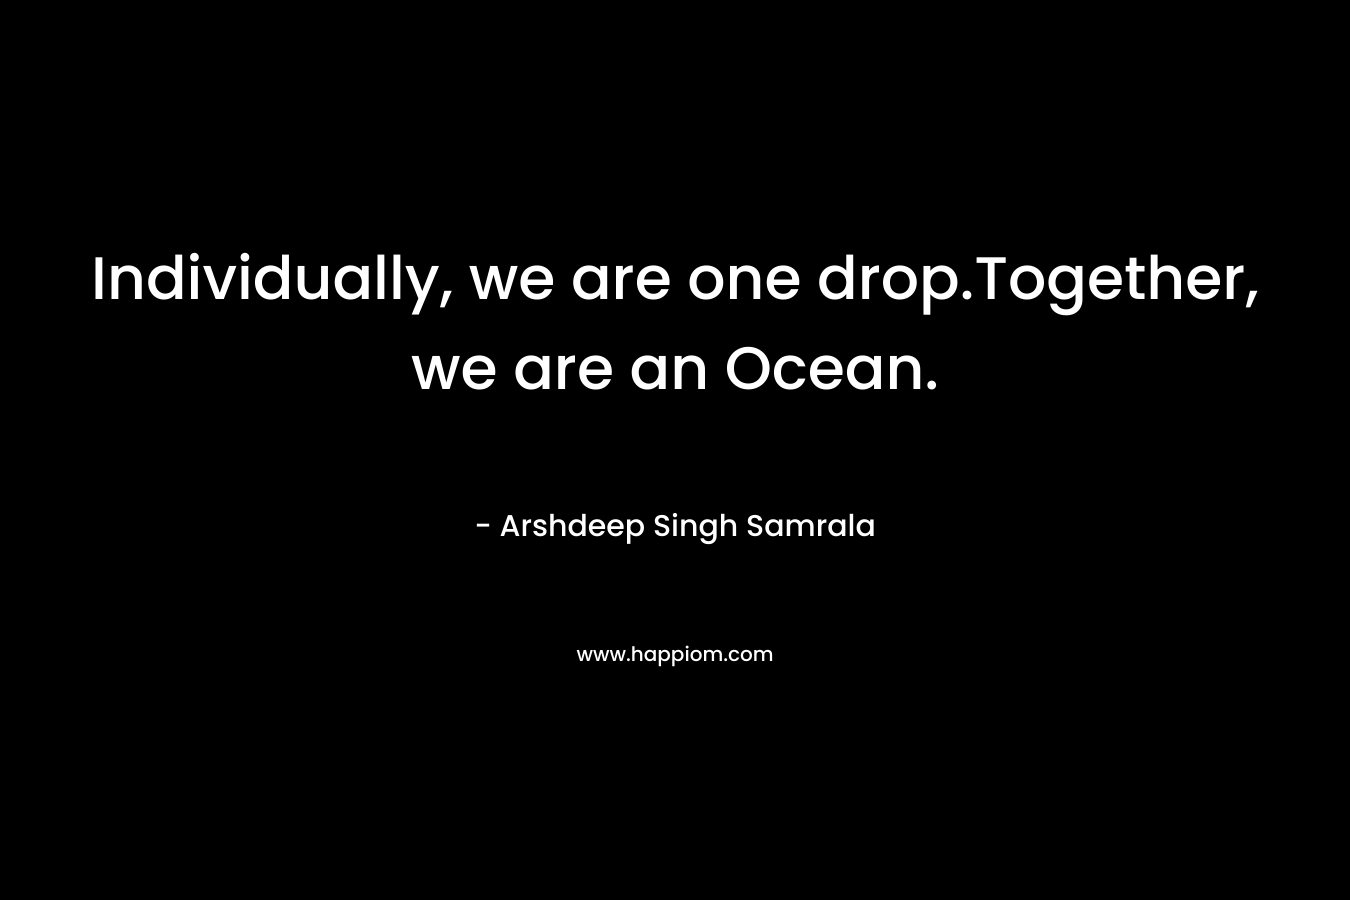 Individually, we are one drop.Together, we are an Ocean. – Arshdeep Singh Samrala